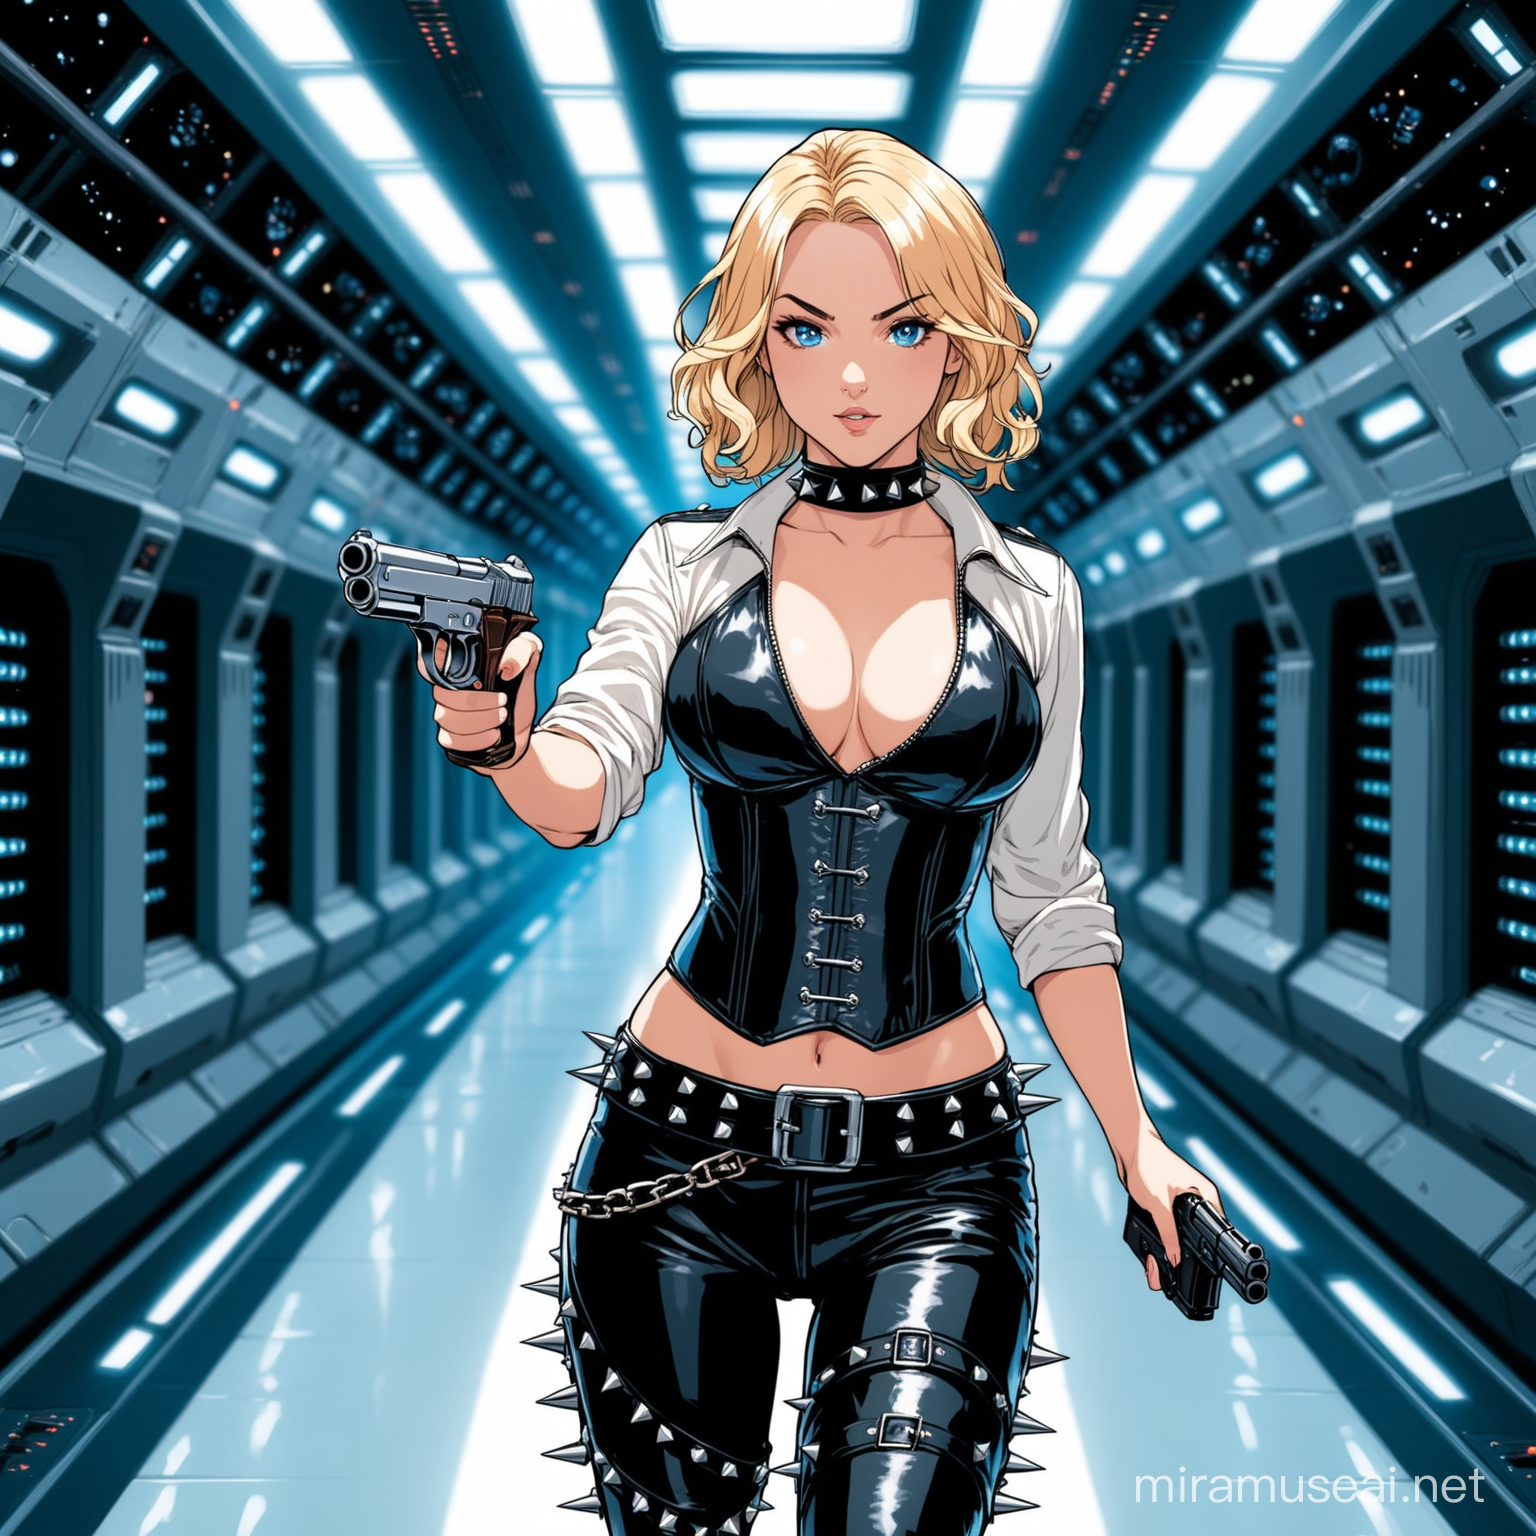 Jenna Morgan , blonde hair, short curls, blue eyes,  wearing leather trousers, a leather corset over a white cloth shirt. spiked choker, shooting a pistol, spaceship hallway background.